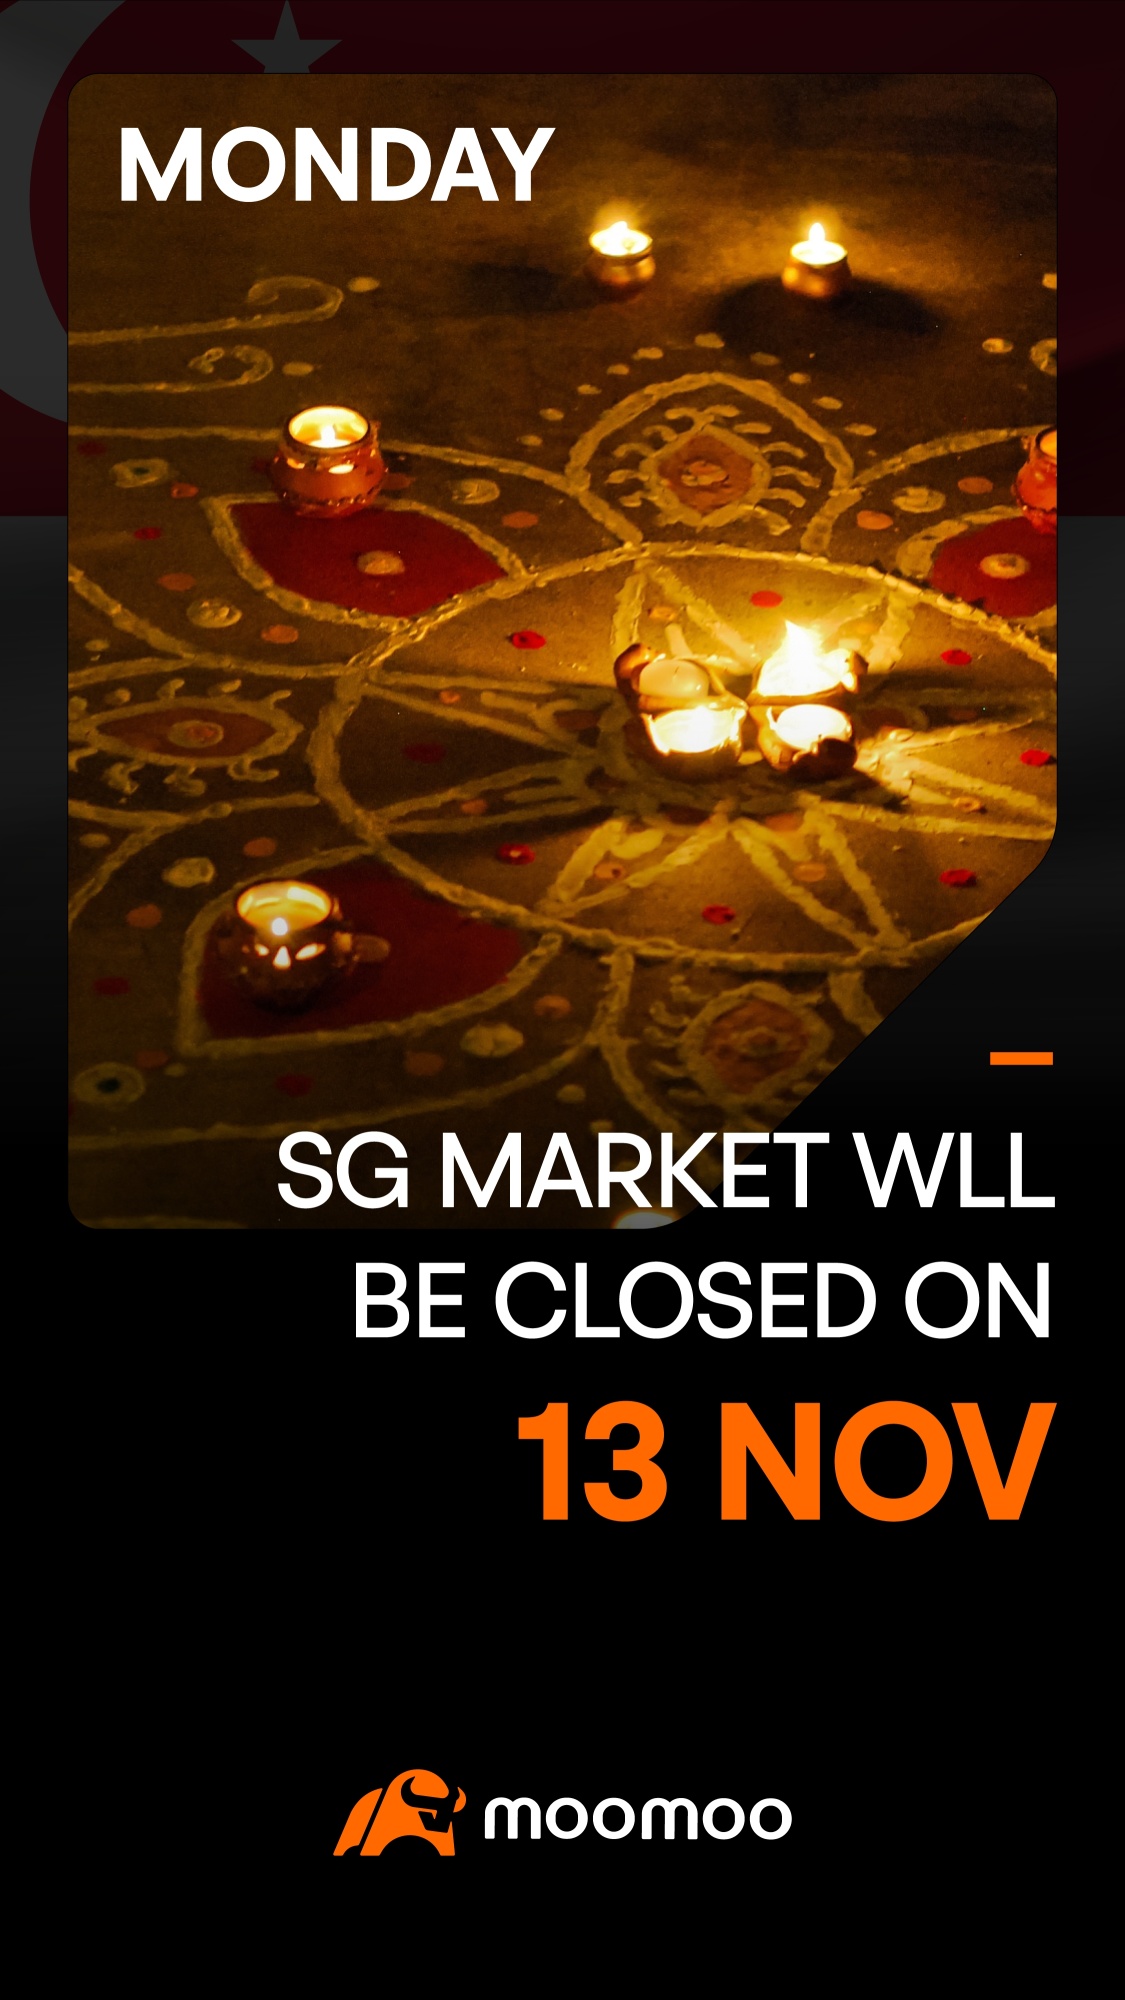 [SG Markets Closure Notice] Stock Markets Will Be Closed on November 13, Monday, for Deepavali